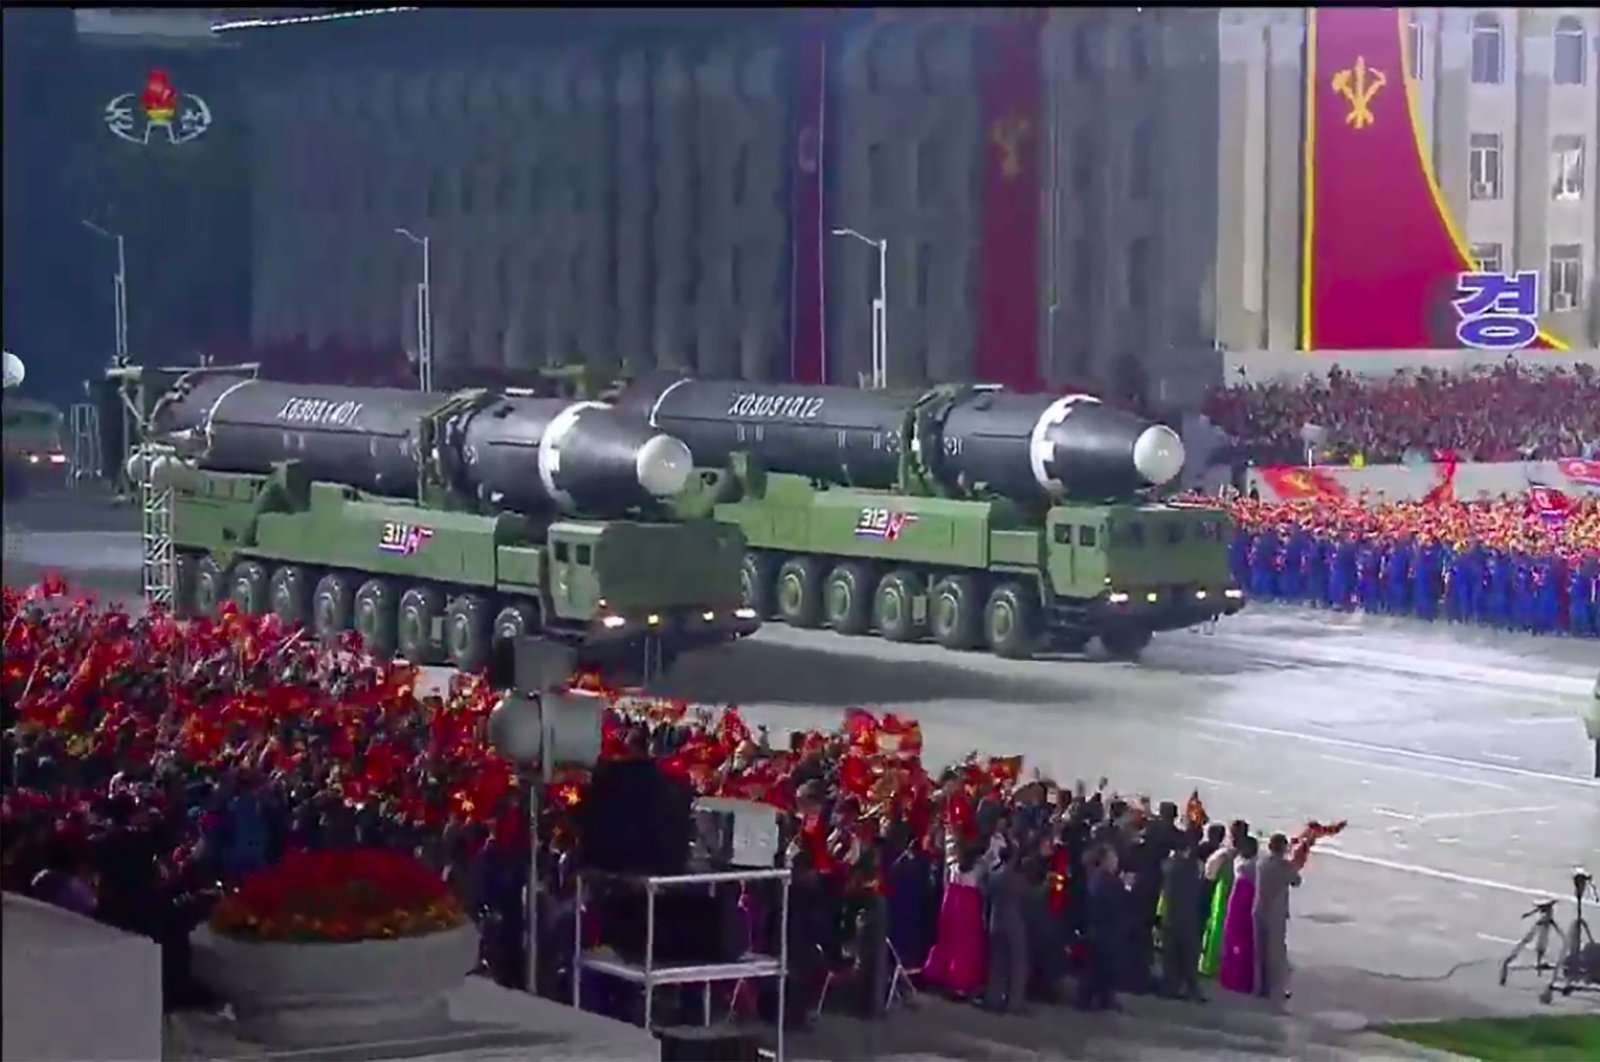 A screen grab taken from a KCNA broadcast shows what appears to be new North Korean intercontinental ballistic missiles during a military parade marking the 75th anniversary of the founding of the Workers' Party of Korea, on Kim Il Sung square in Pyongyang, Oct. 10, 2020 (Photo by - / KCNA VIA KNS / AFP)